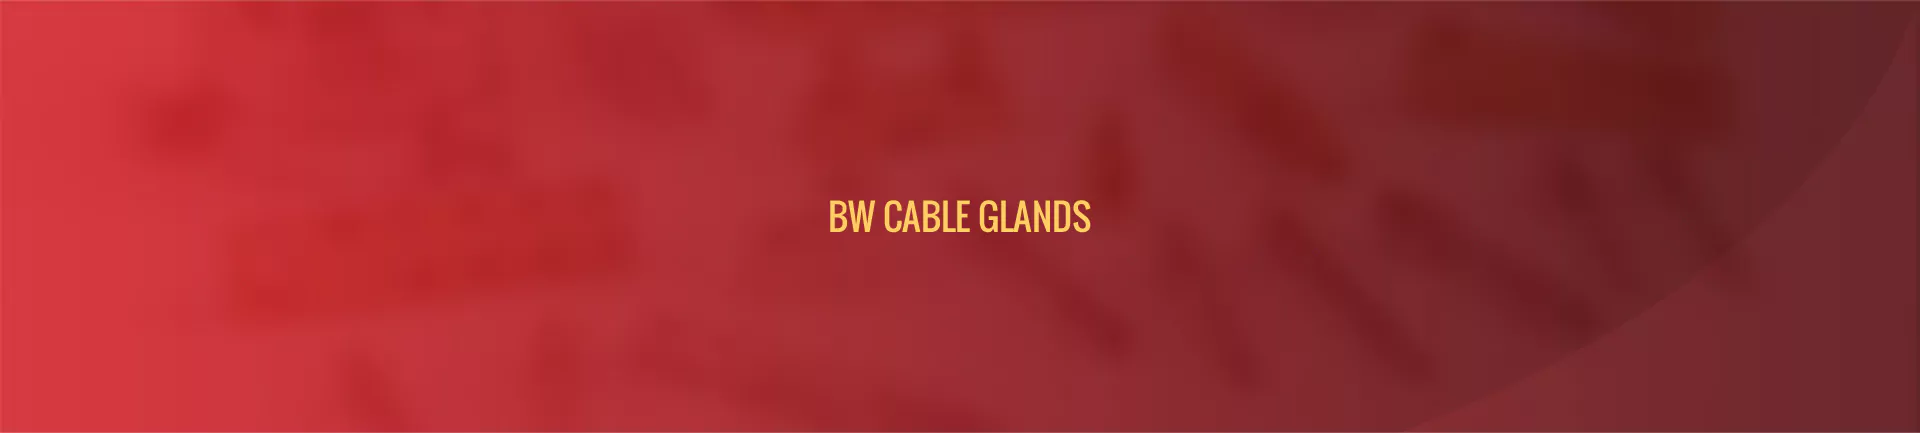 bw-cable-glands-banner